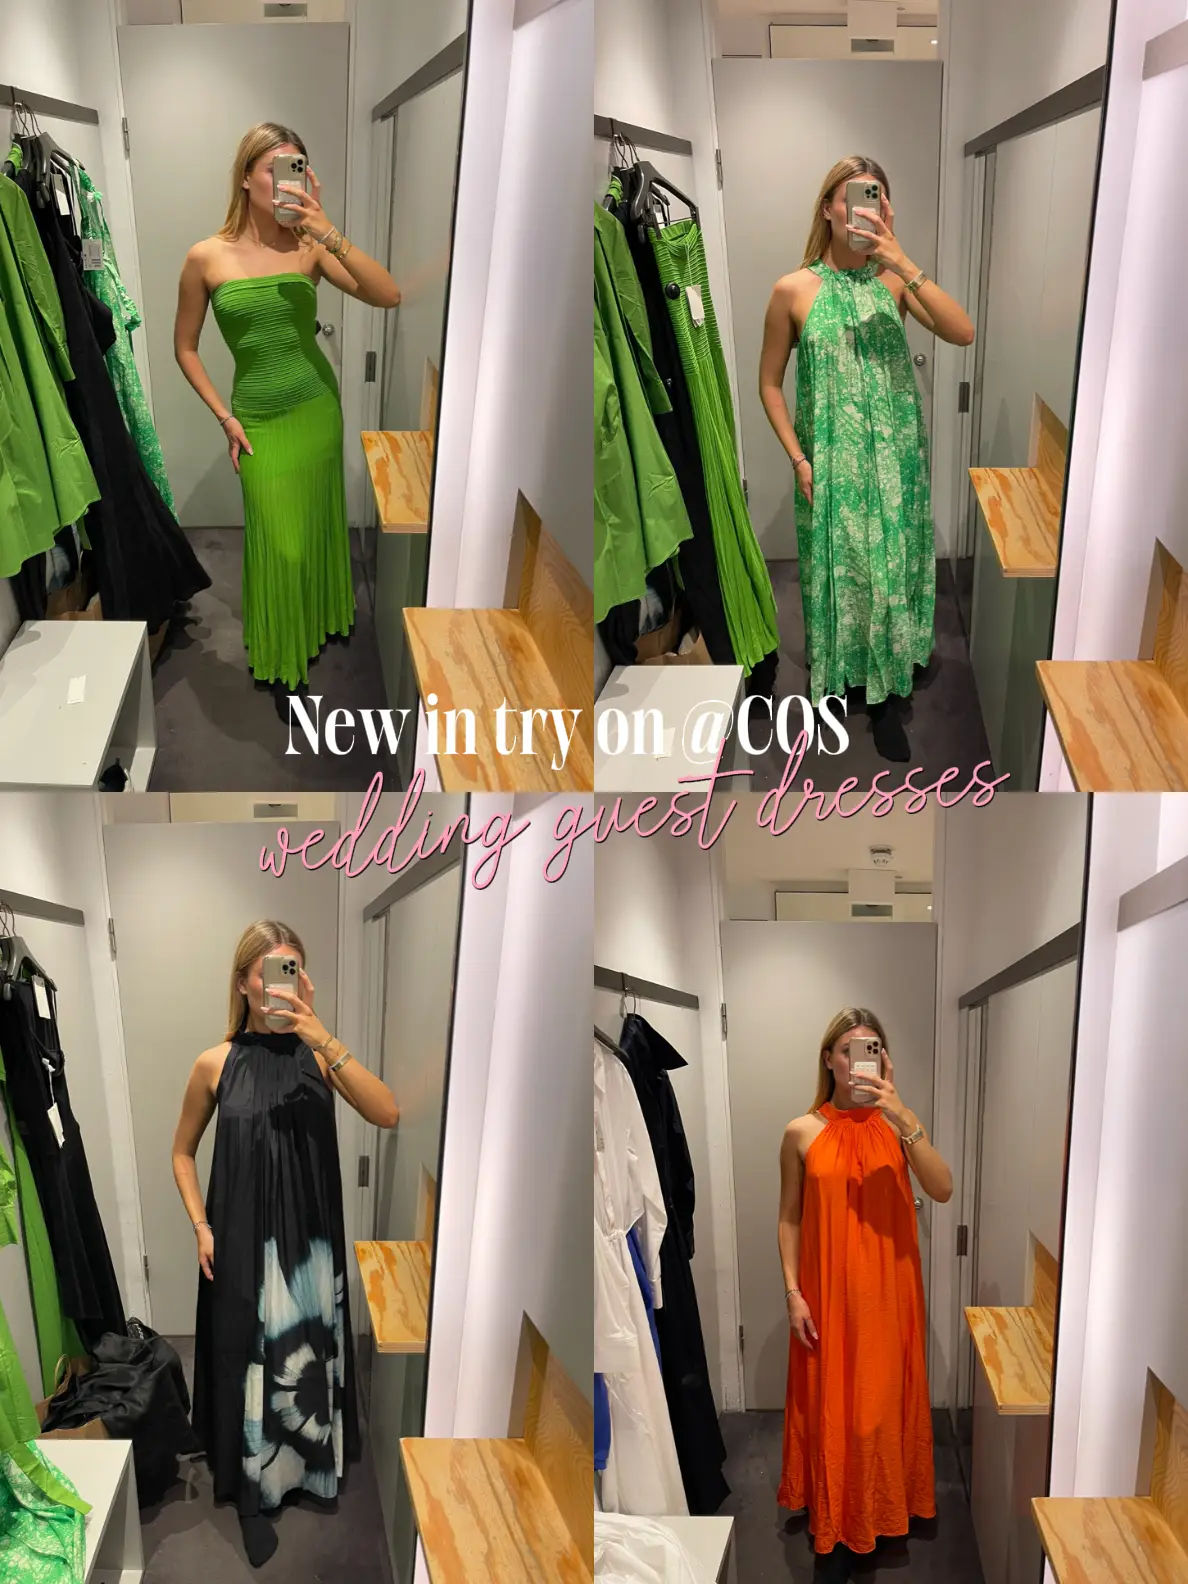 New in try on @COS wedding guest dresses